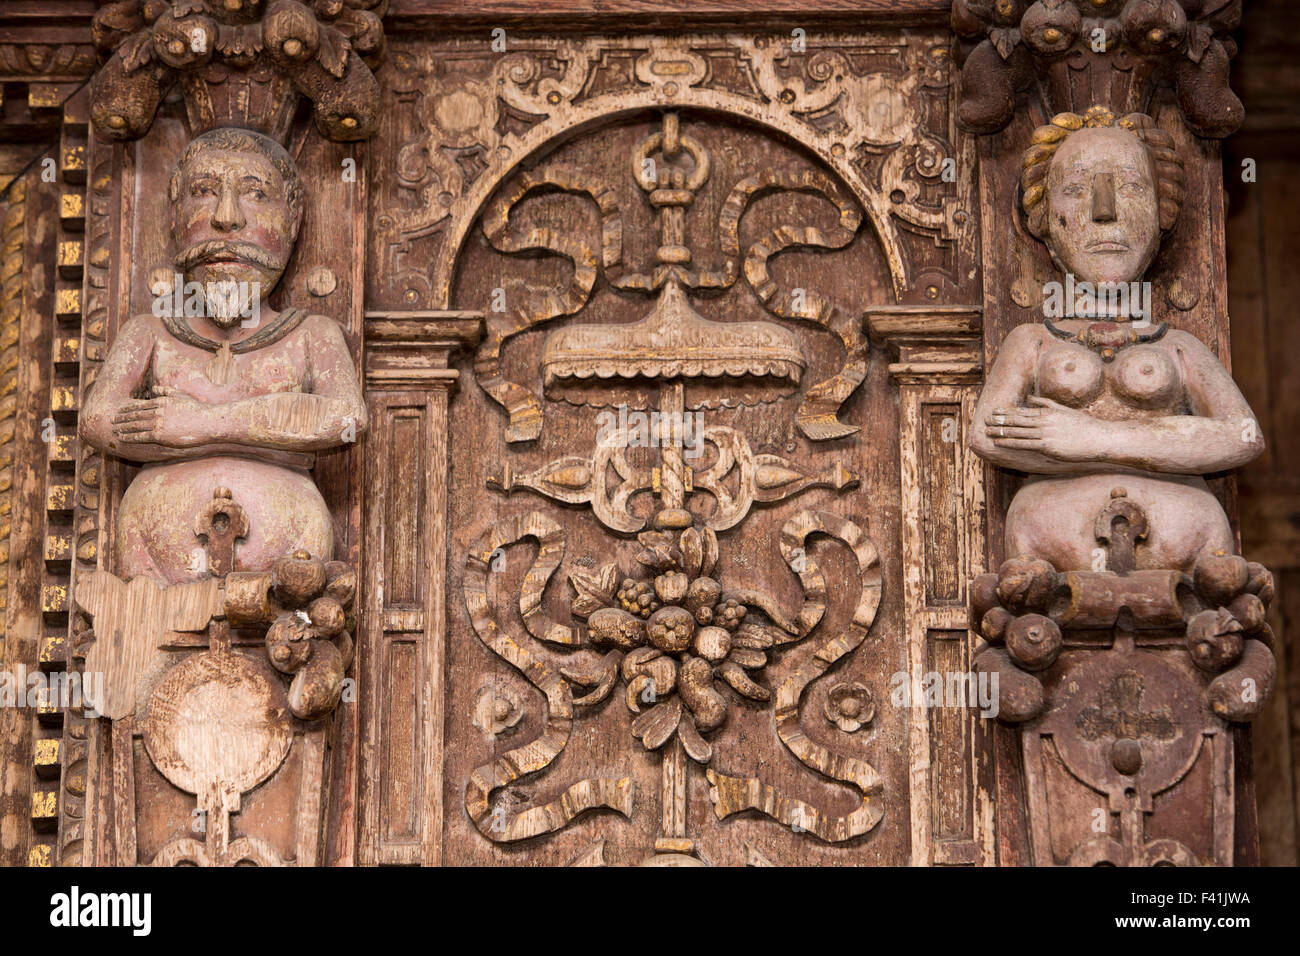 UK, England, Shropshire, Craven Arms, Stokesay Castle, The Solar, ornate fire surround carving detail Stock Photo